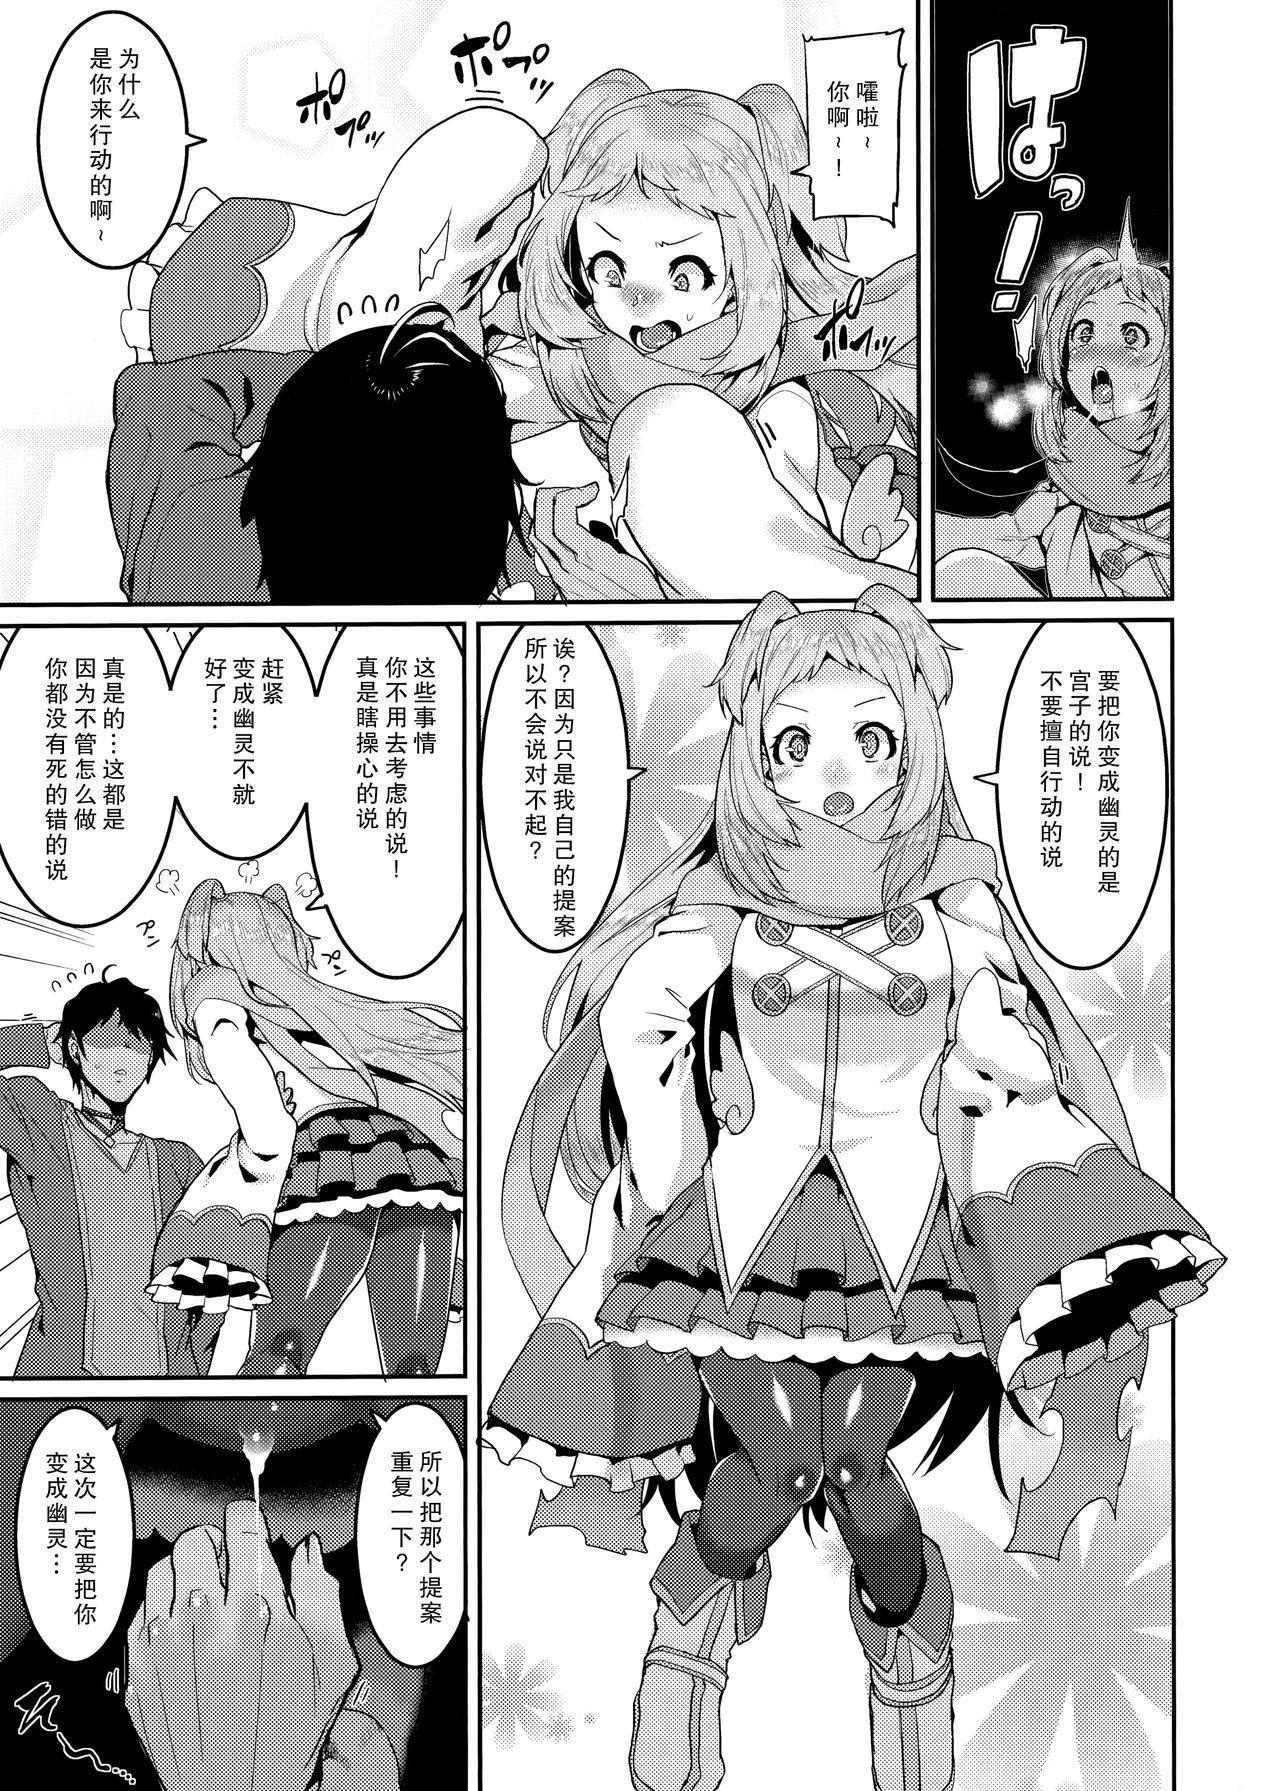 Gayfuck (C96) [HBO (Henkuma)] Pudding Switch (Princess Connect! Re:Dive) [Chinese] 【零食汉化组】 - Princess connect Teenxxx - Page 8